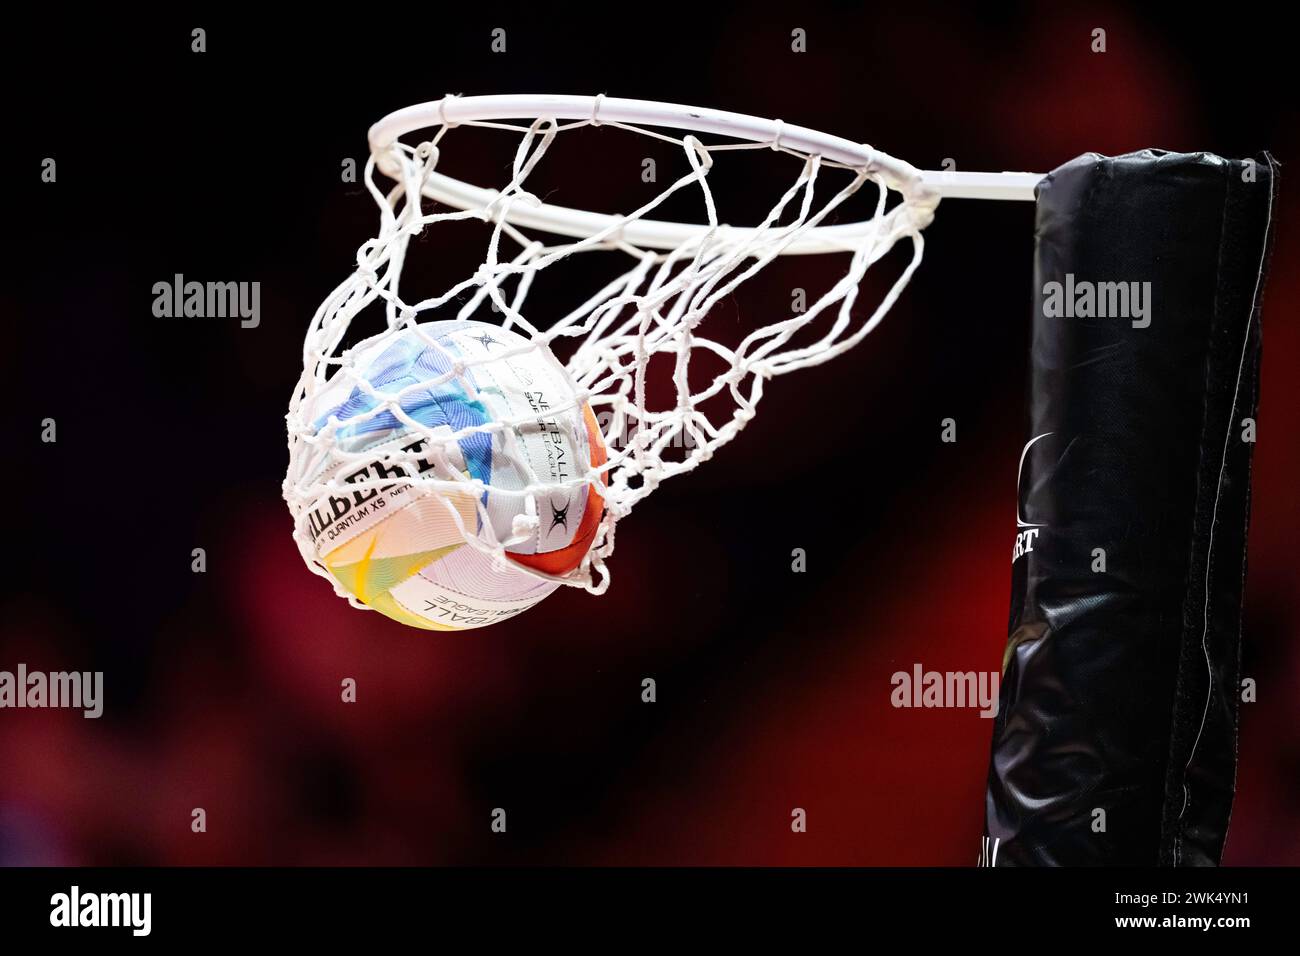 NOTTINGHAM, UNITED KINGDOM. Feb 17, 24. A ball entered to the net during the match of Strathclyde Sirens v Team Bath during Netball Super League Season Opener 2024 at Motorpoint Arena on Saturday, February 17, 2024, NOTTINGHAM, ENGLAND. Credit: Taka G Wu/Alamy Live News Stock Photo